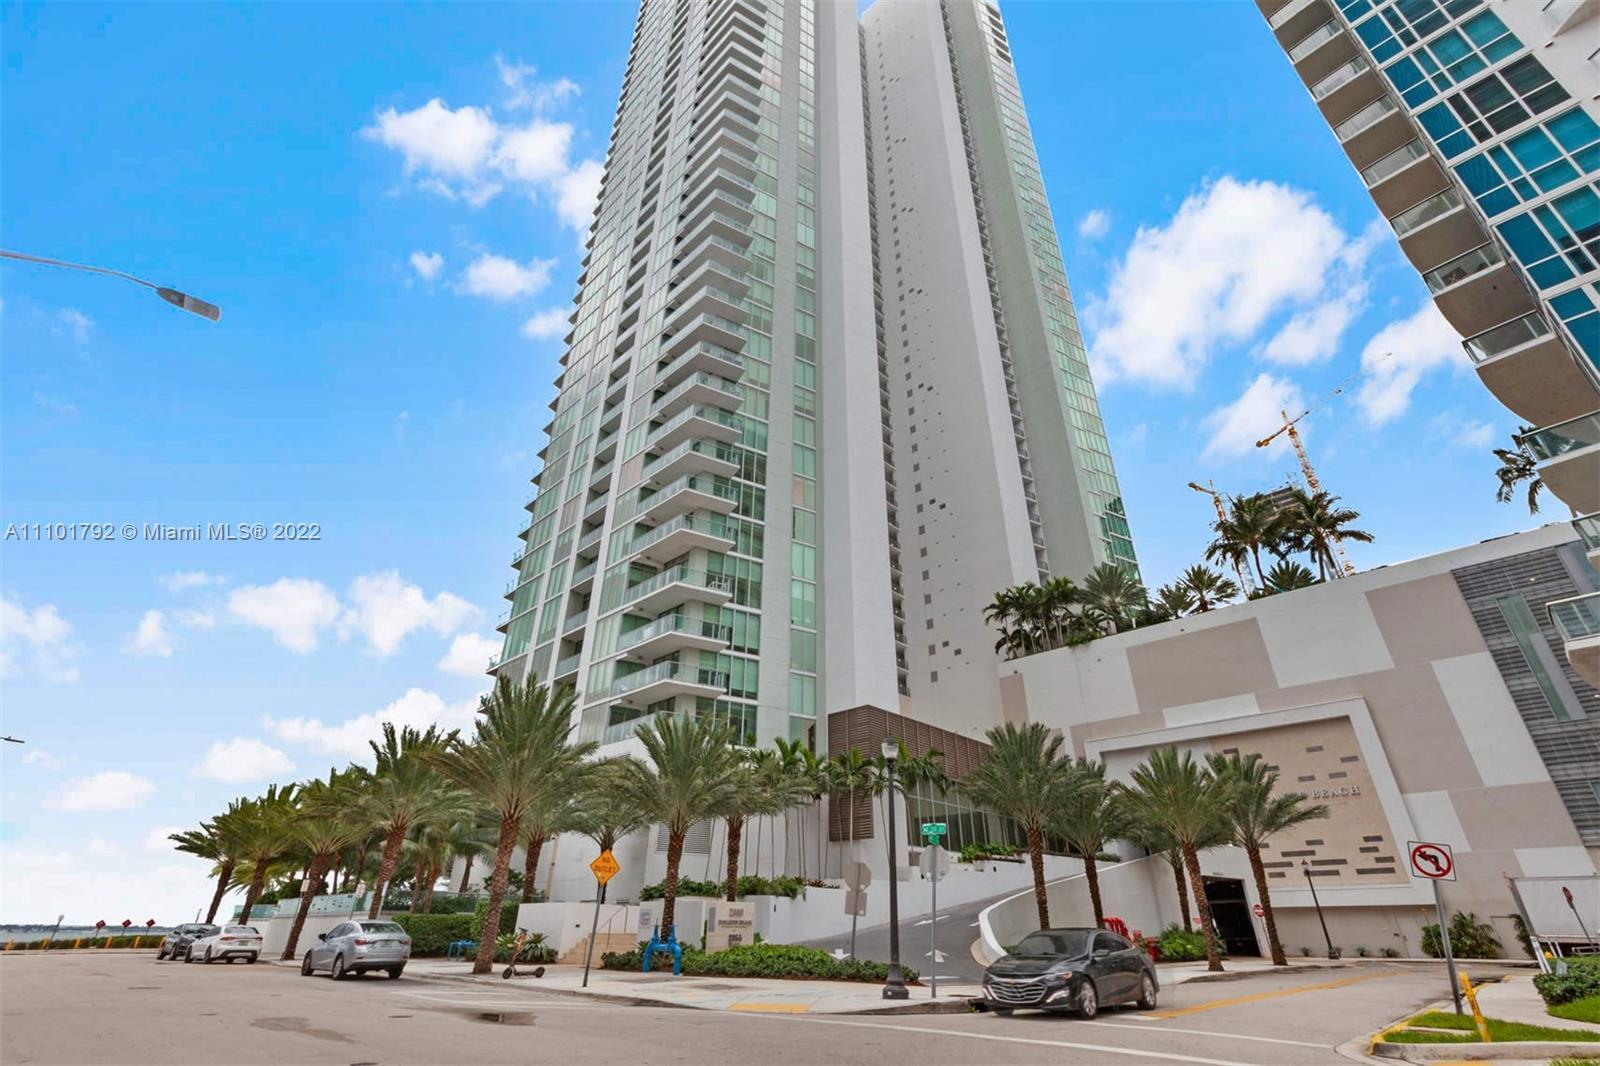 Spectacular direct water views from this Spacious Podium low floor unit at Biscayne Beach. Unit has 